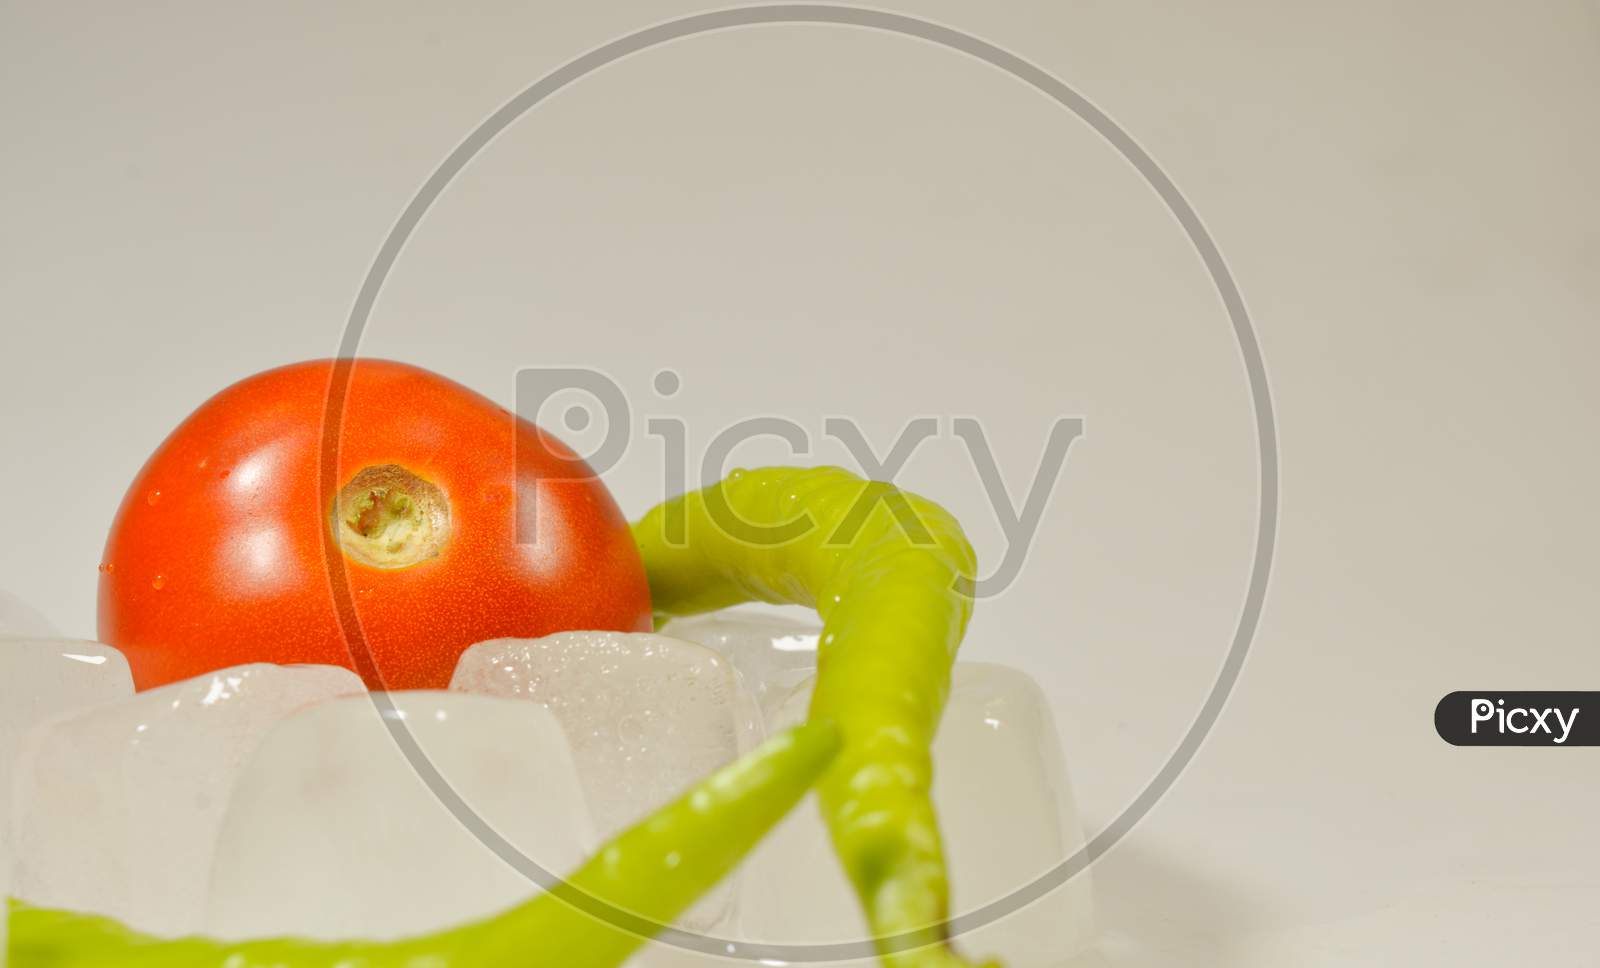 Tomato and Chillies with the ice cubes Cubes isolated with white background